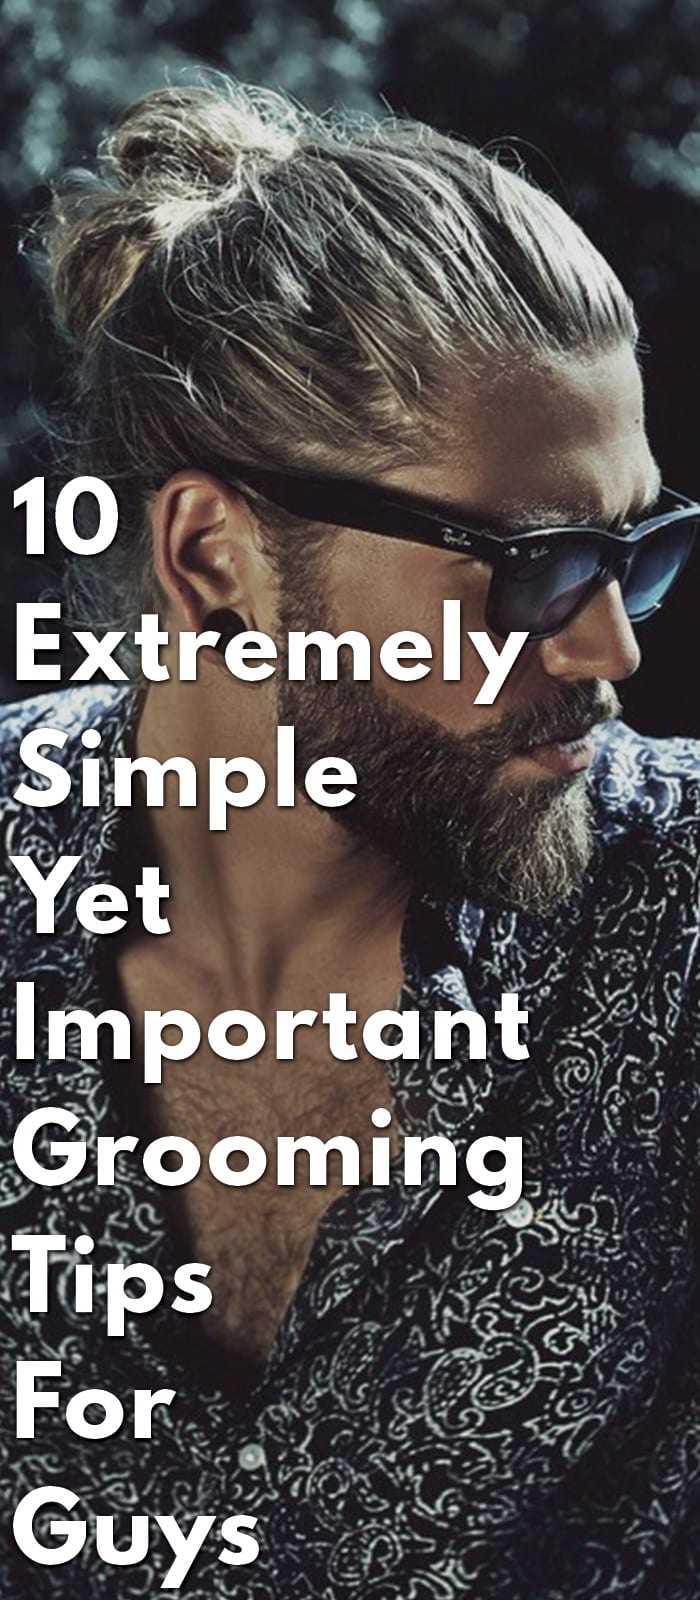 10-Extremely-Simple-Yet-Important-Grooming-Tips-For-Guys